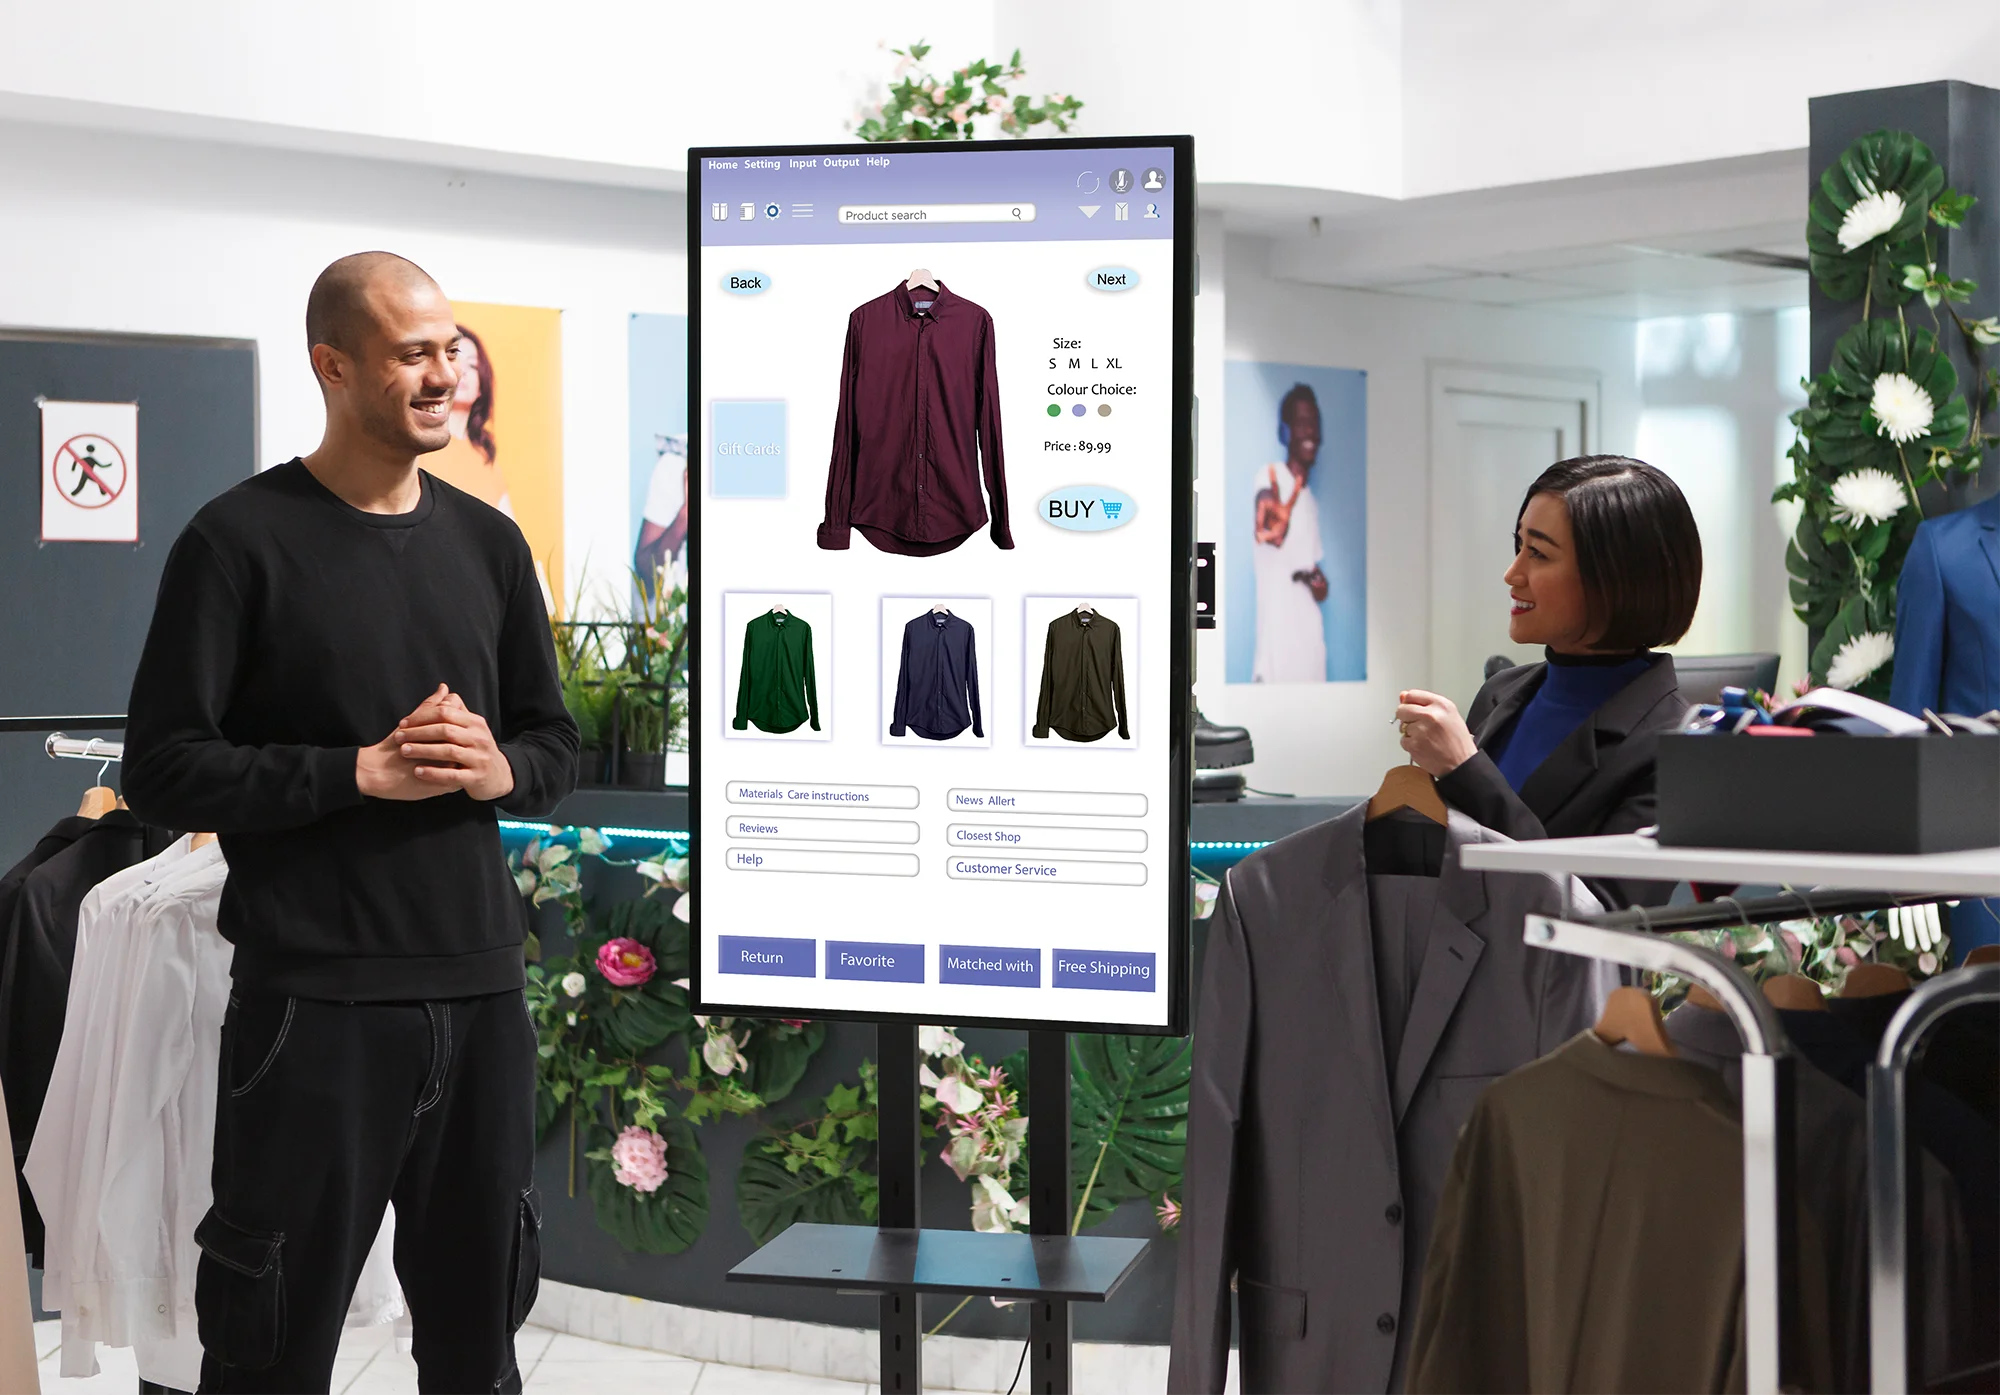 Smart Queue Management and Digital Signage Can Increase